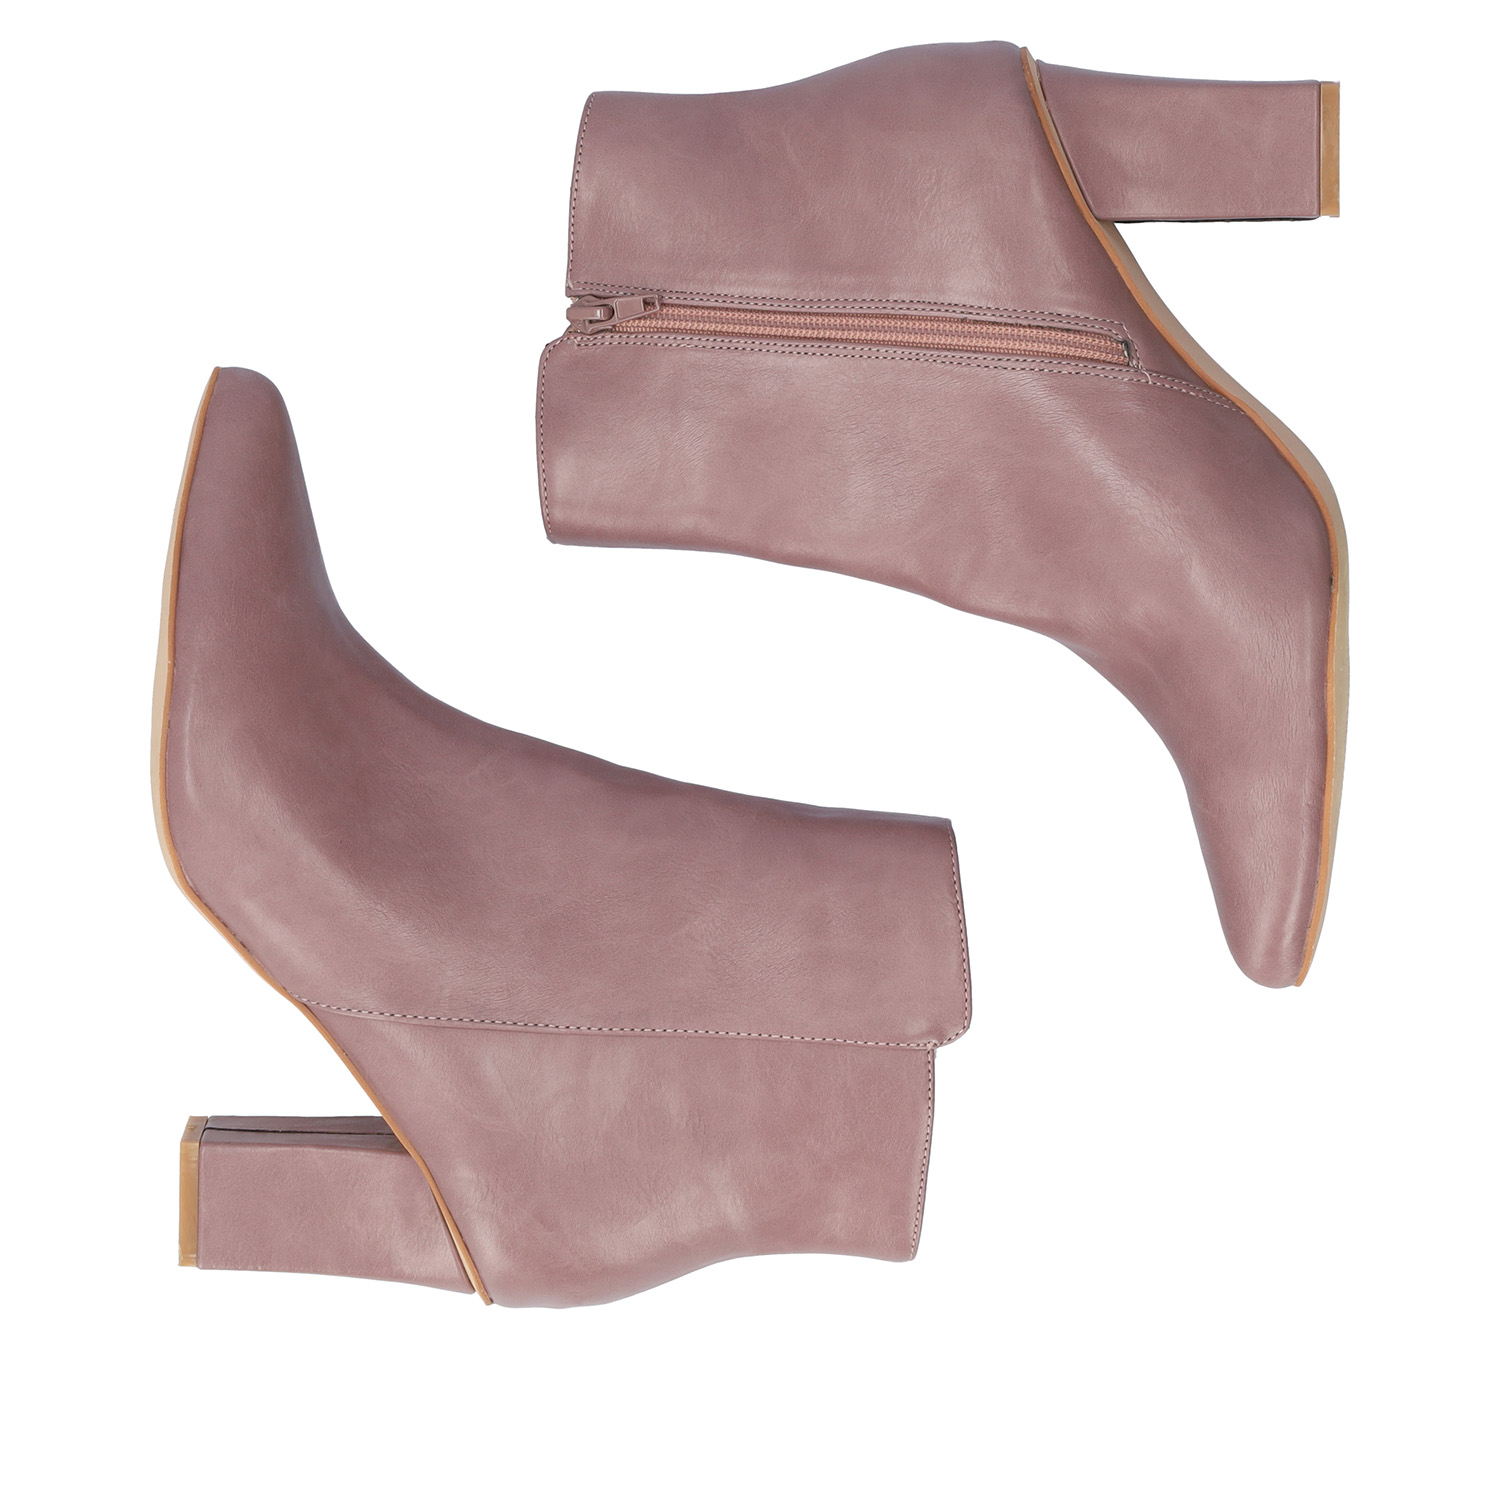 Heeled booties in mauve faux leather. 